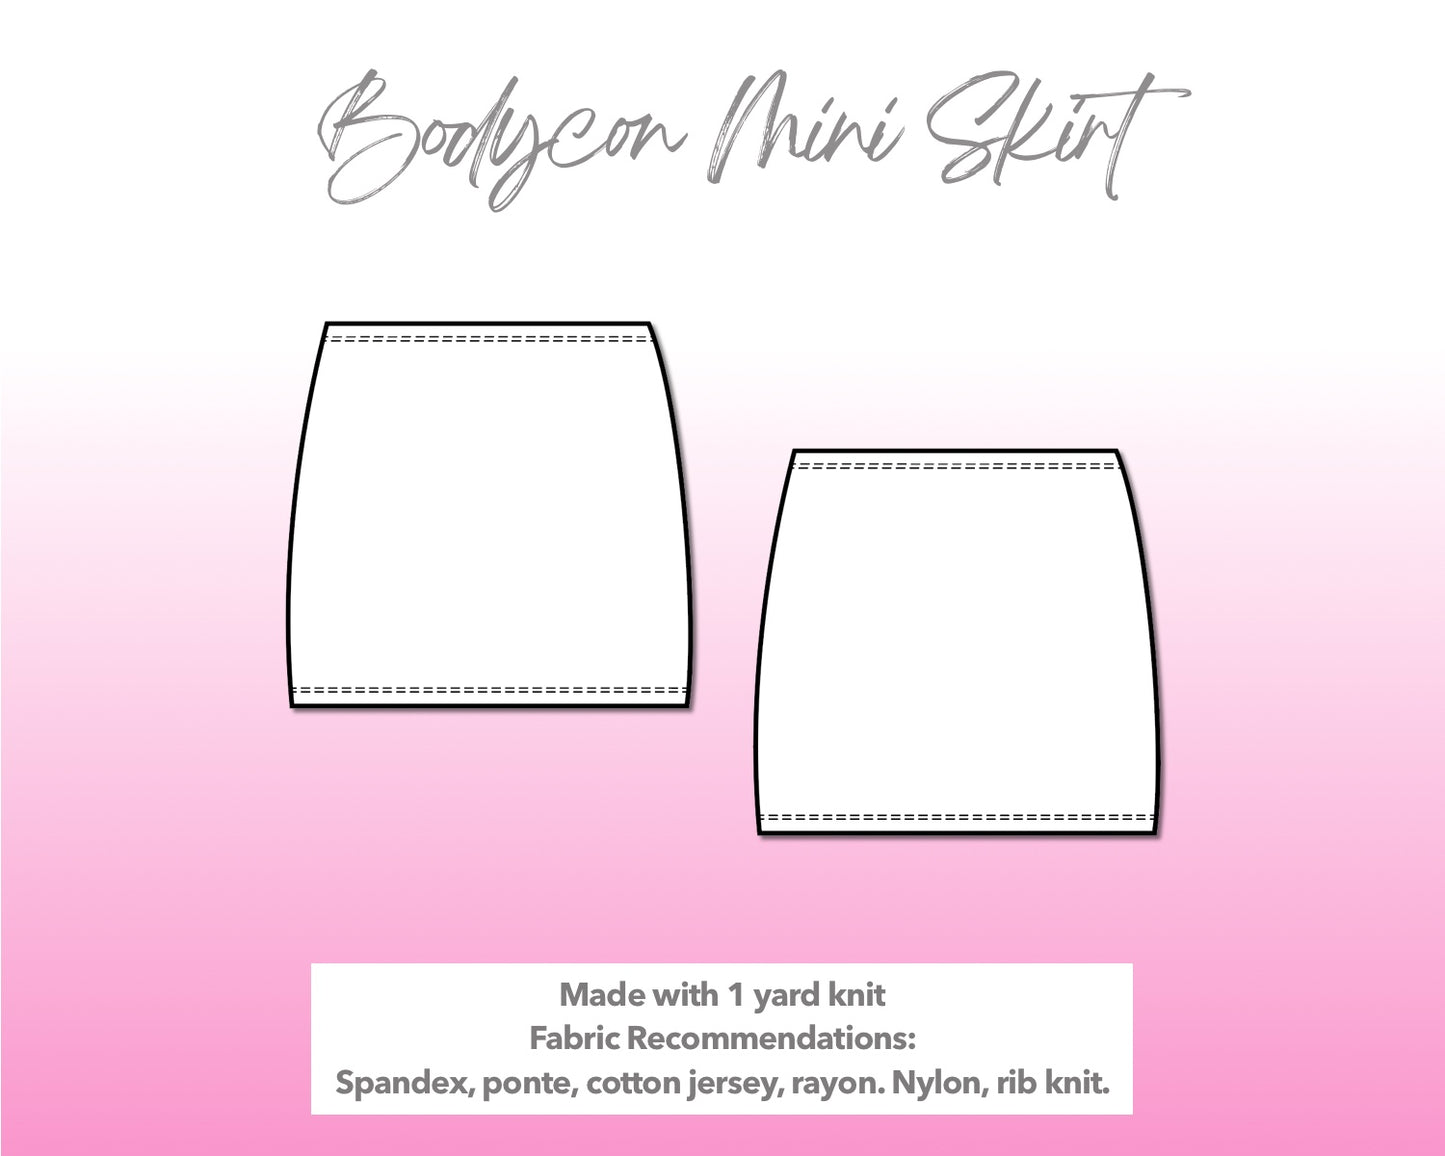 Illustration and detailed description for Bodycon Mini Skirt sewing pattern.